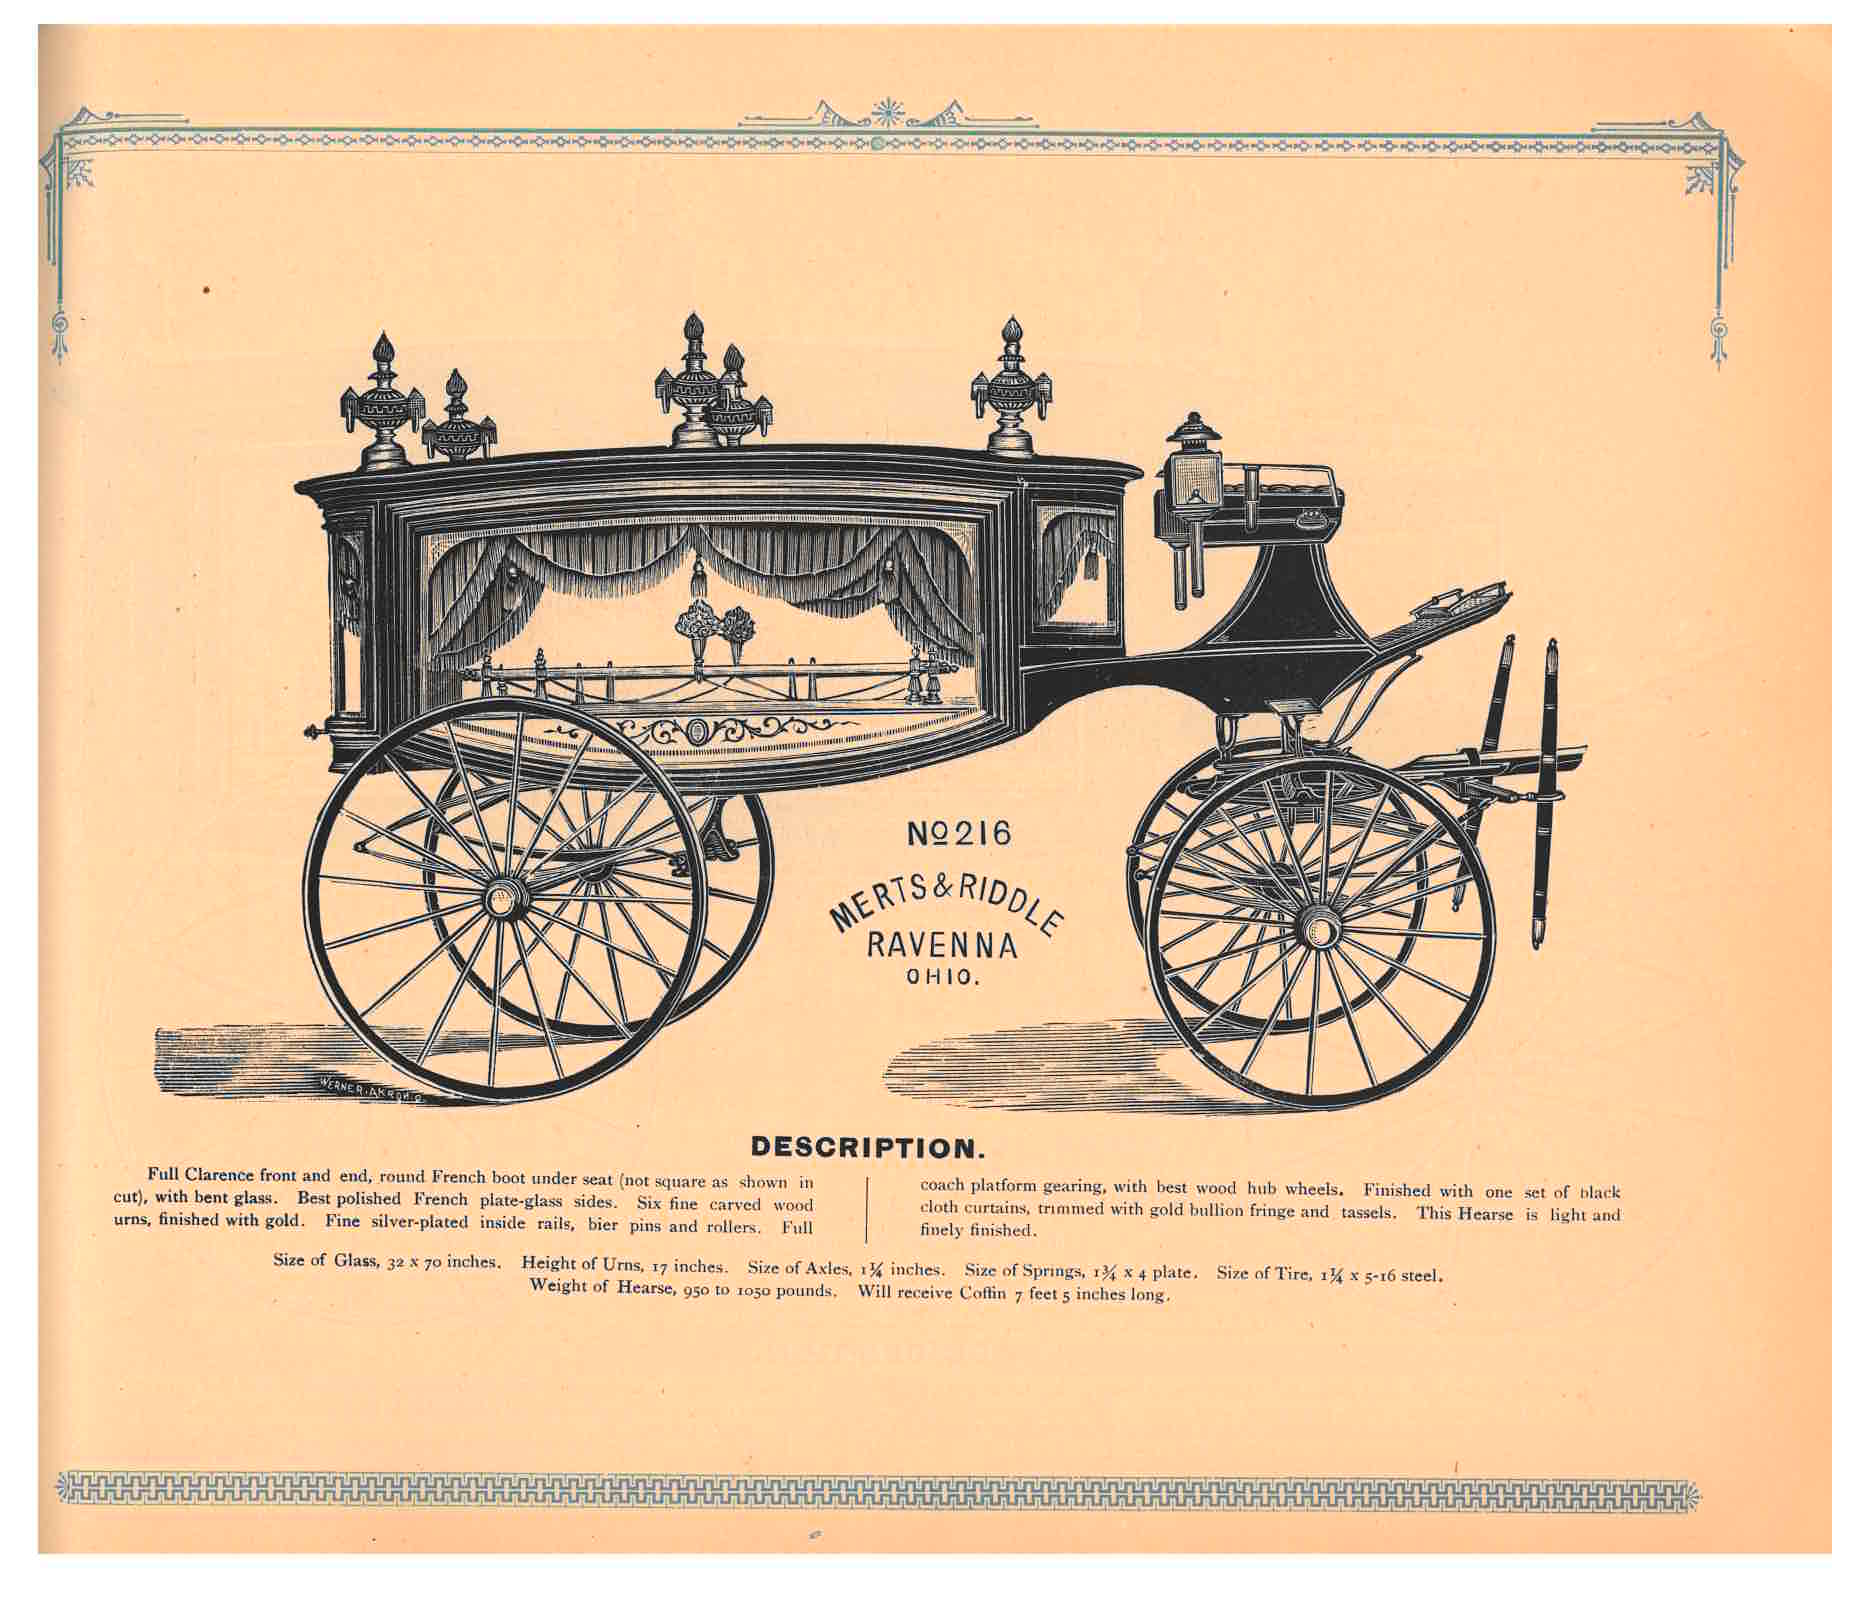 No. 216 horse-drawn hearse with glass sides (horses not shown)